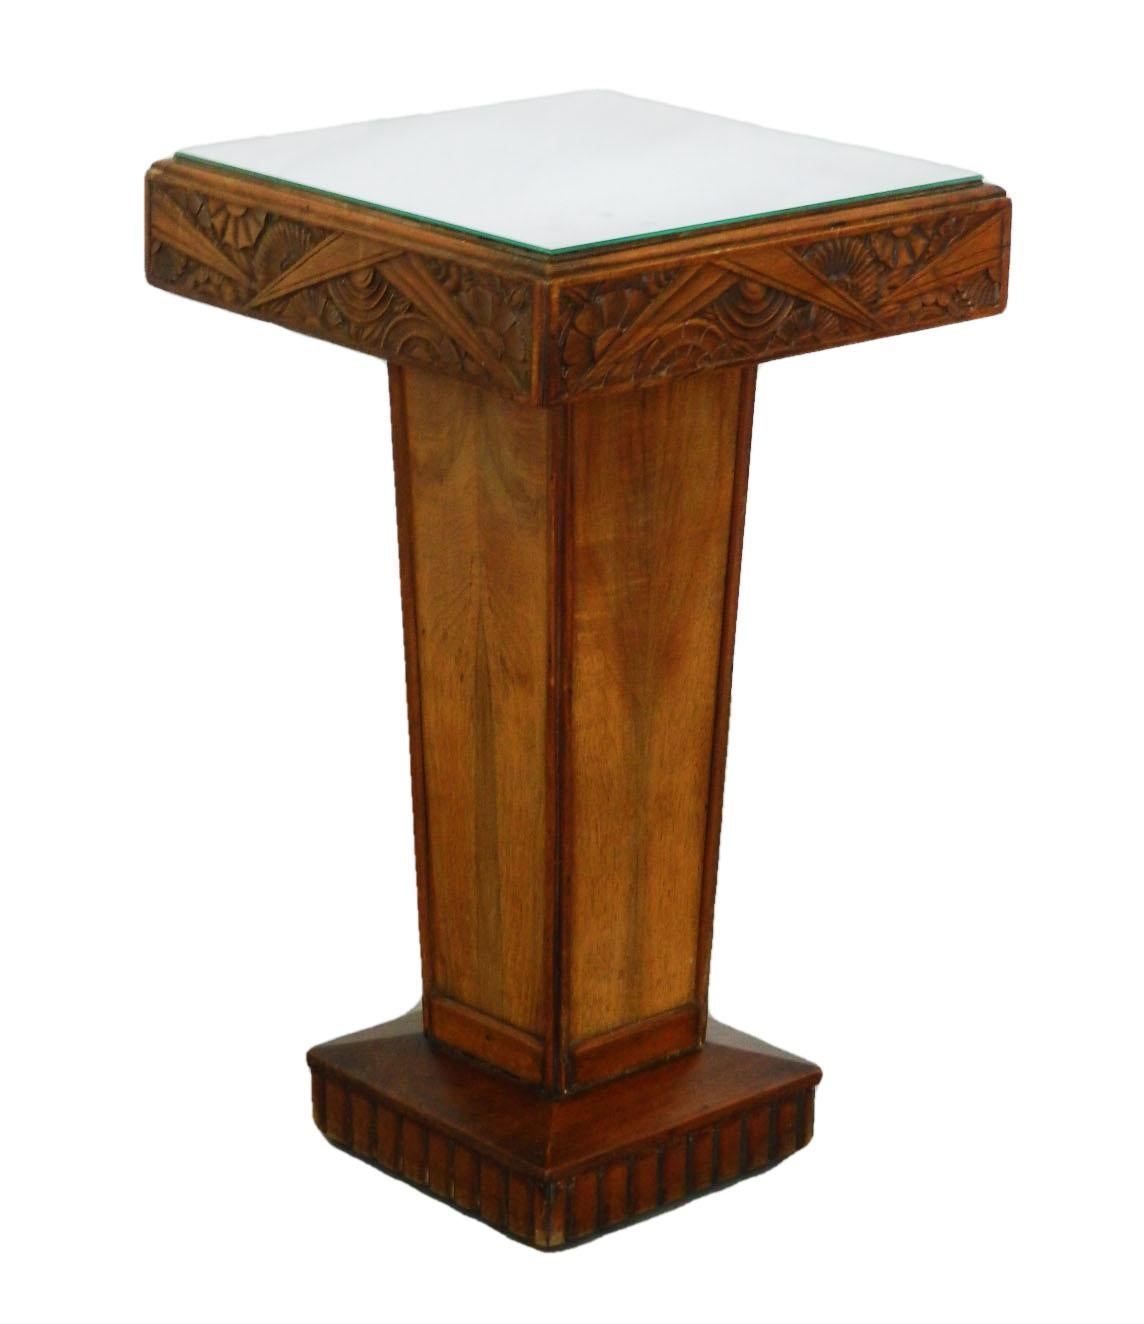 Art Deco stand pedestal table French in the manner Sue et Mare, circa 1930.
Carved walnut typical motifs Sue et Mare
Mirror top.pedastal
Very good condition for its age only minor signs of use

 